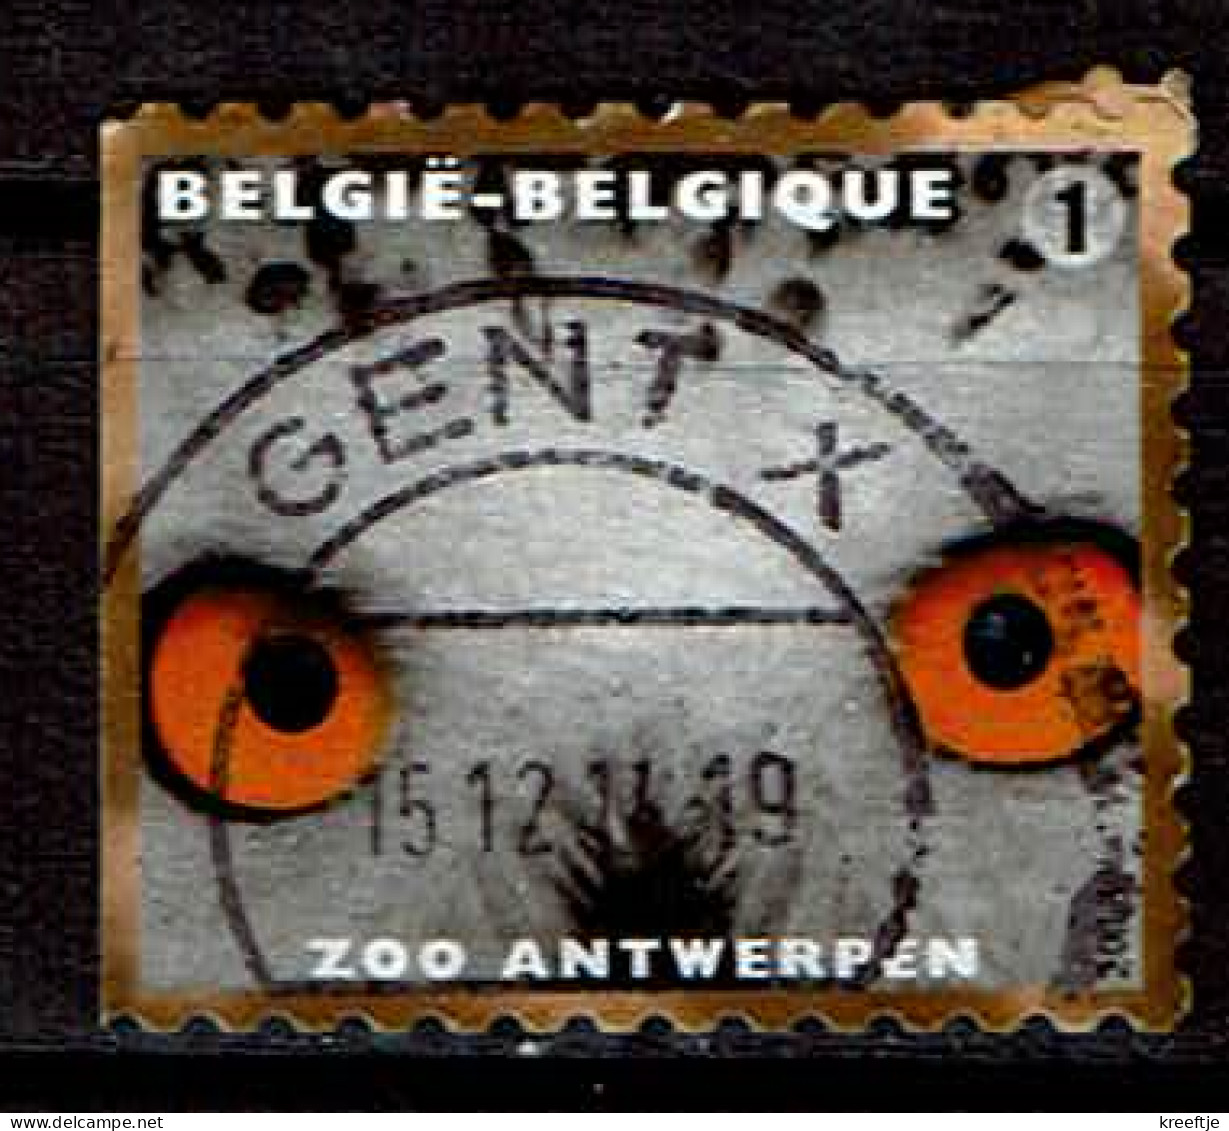 Uil Uit 2013 (OBP 4340 ) - Used Stamps